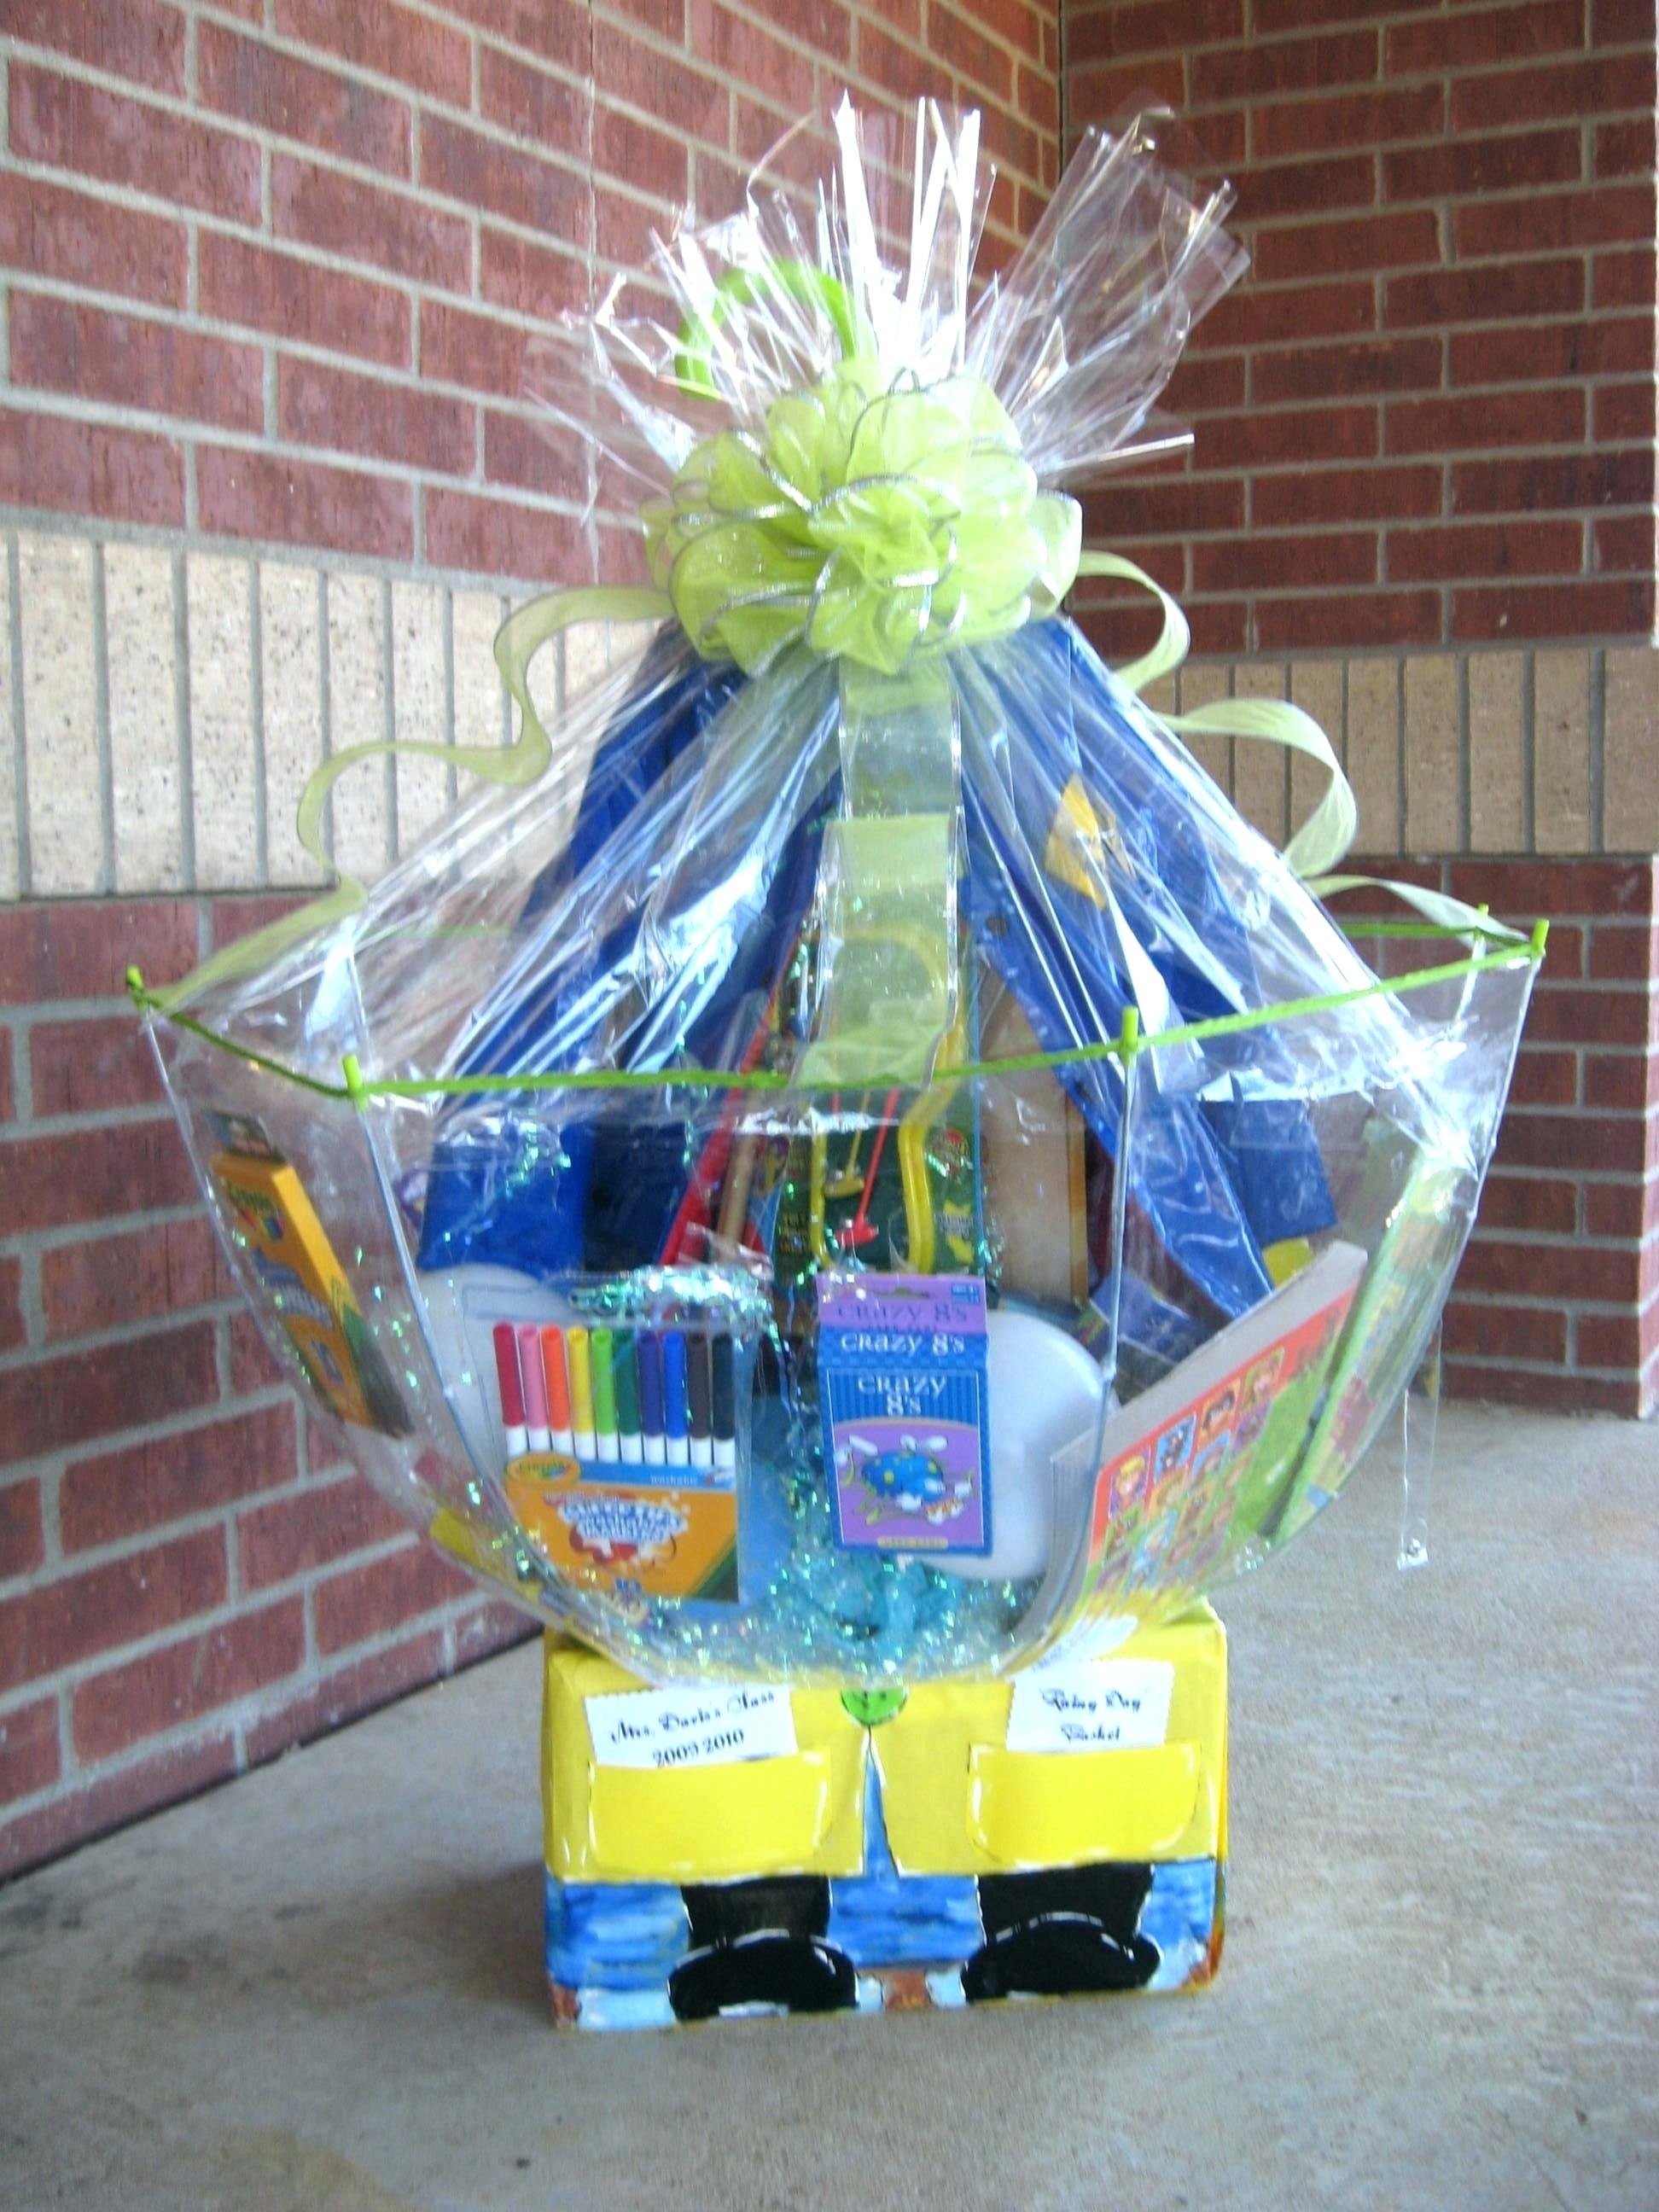 The 22 Best Ideas for Gift Basket Ideas for Silent Auction – Home